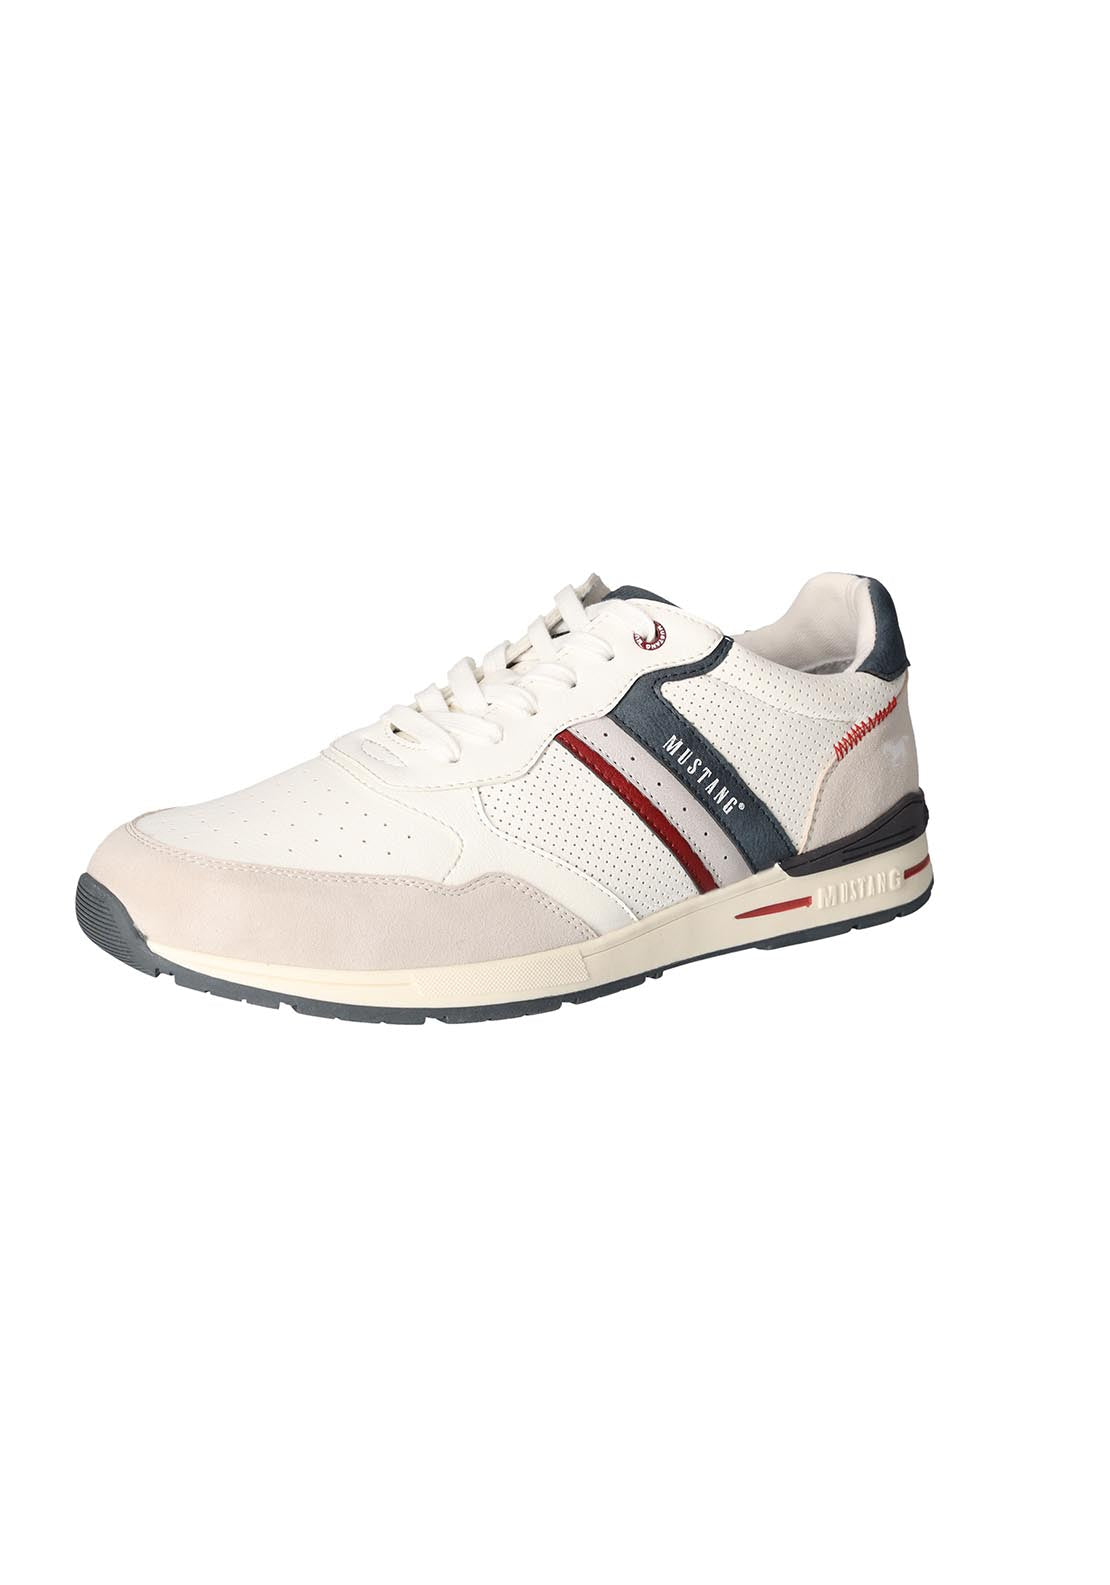 Mustang Trainer - Beige &amp; White 1 Shaws Department Stores